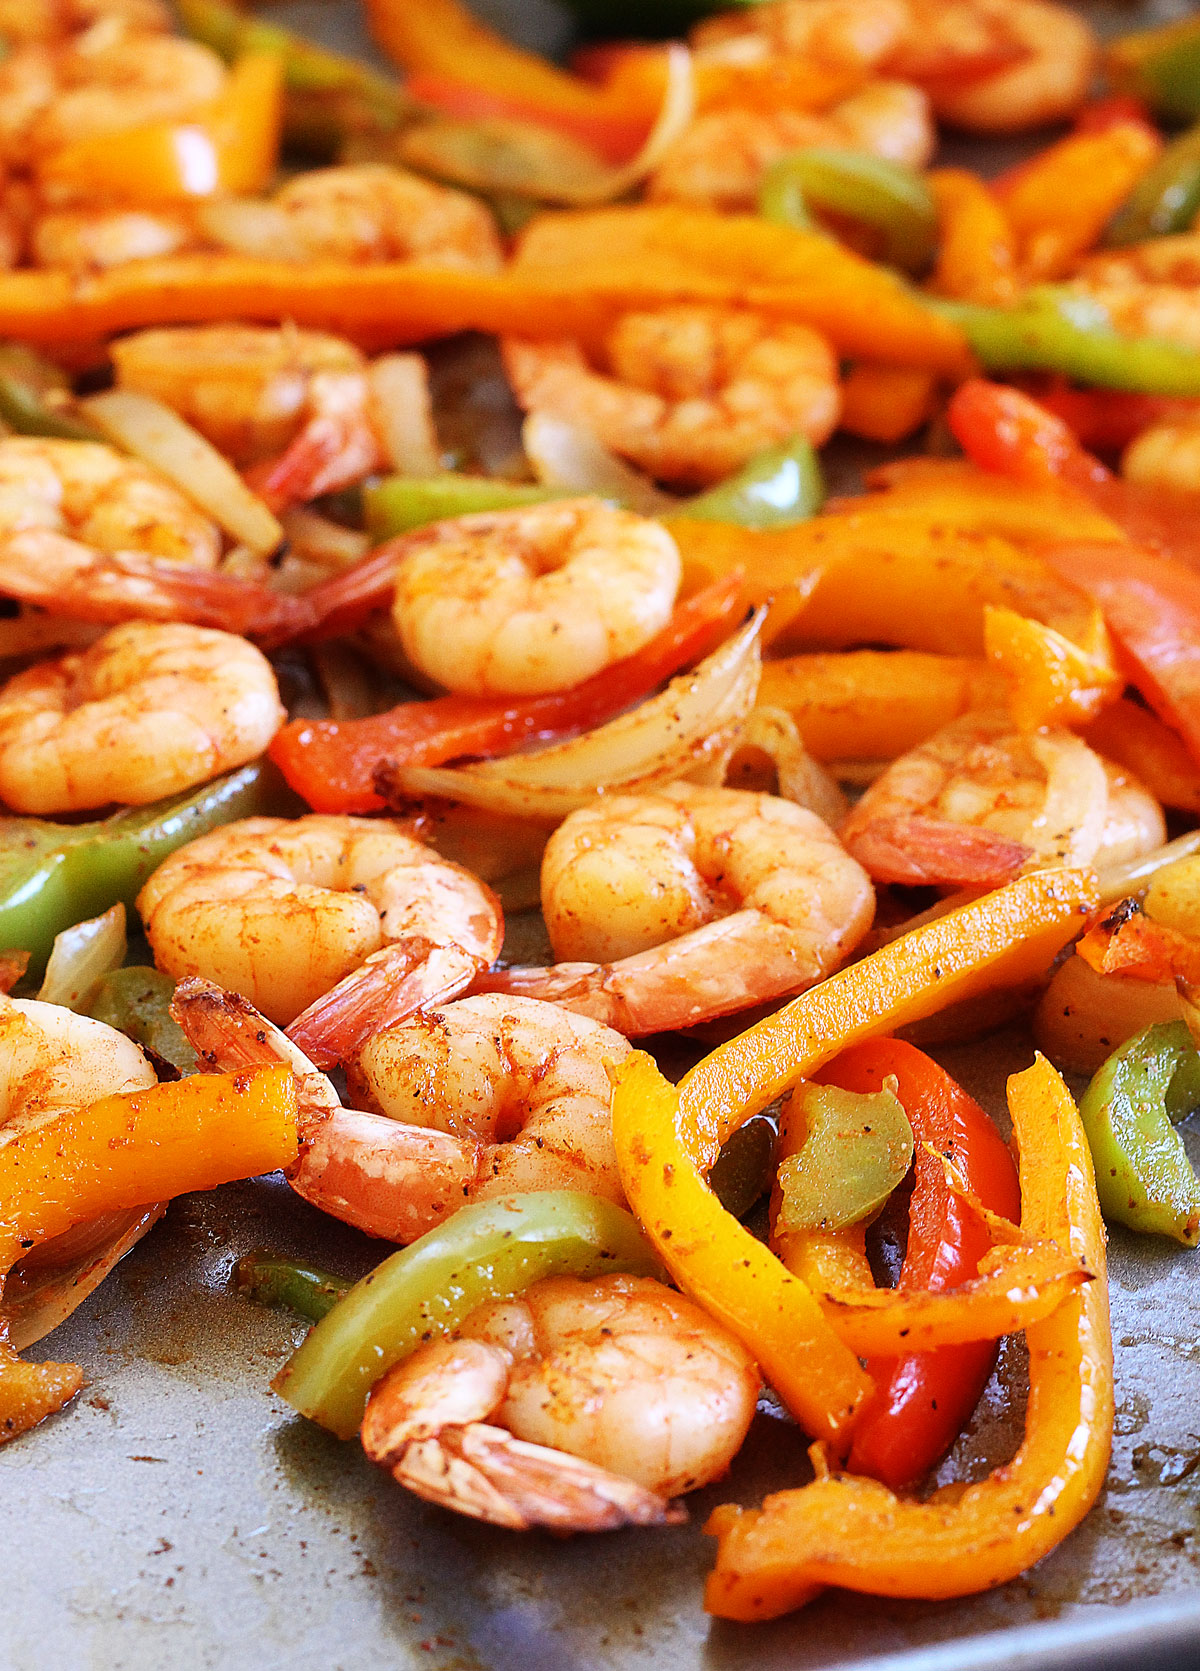 These sheet pan Shrimp Fajitas are slightly spicy and full of peppers and onions with hints of lime. Life-in-the-Lofthouse.com